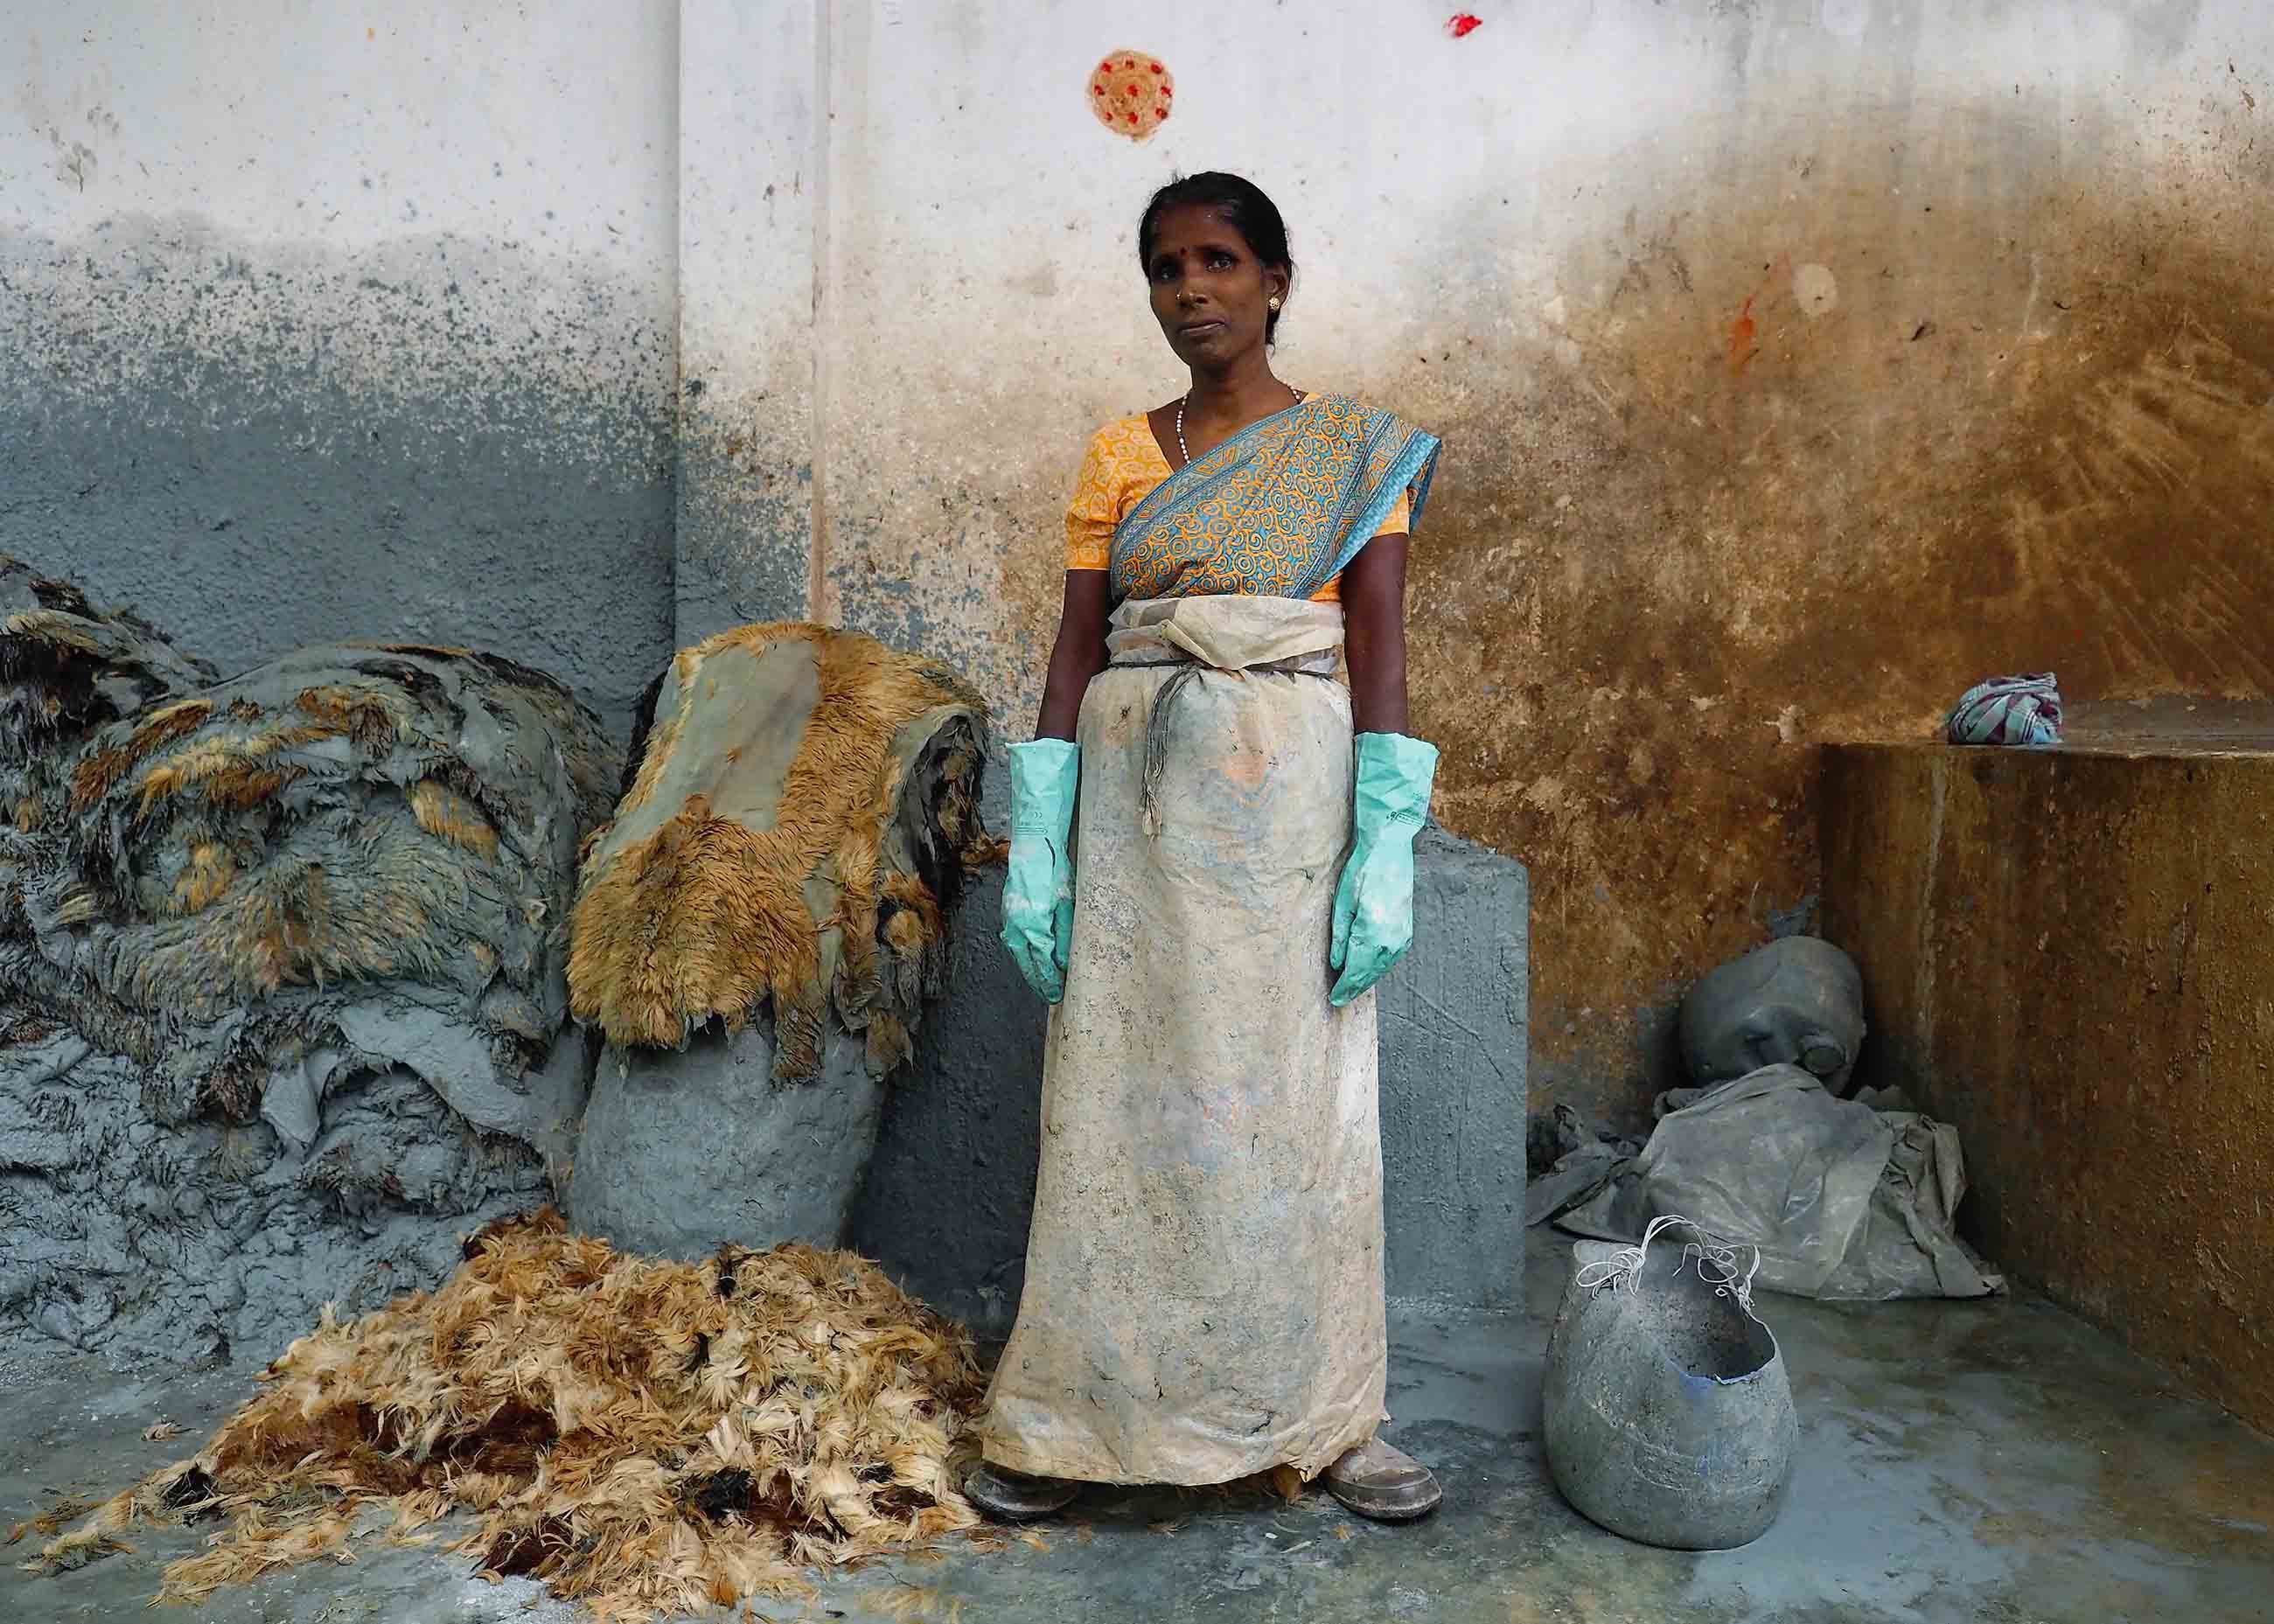 The situation in Hazaribagh is not unlike that in parts of India. This woman protects herself with gloves and sheet plastic as she plucks hair by hand from goat hides soaked in an alkaline solution to loosen the fibers, at a processing facility in Tamil Nadu. Image by Larry C. Price. Bangladesh, 2016.